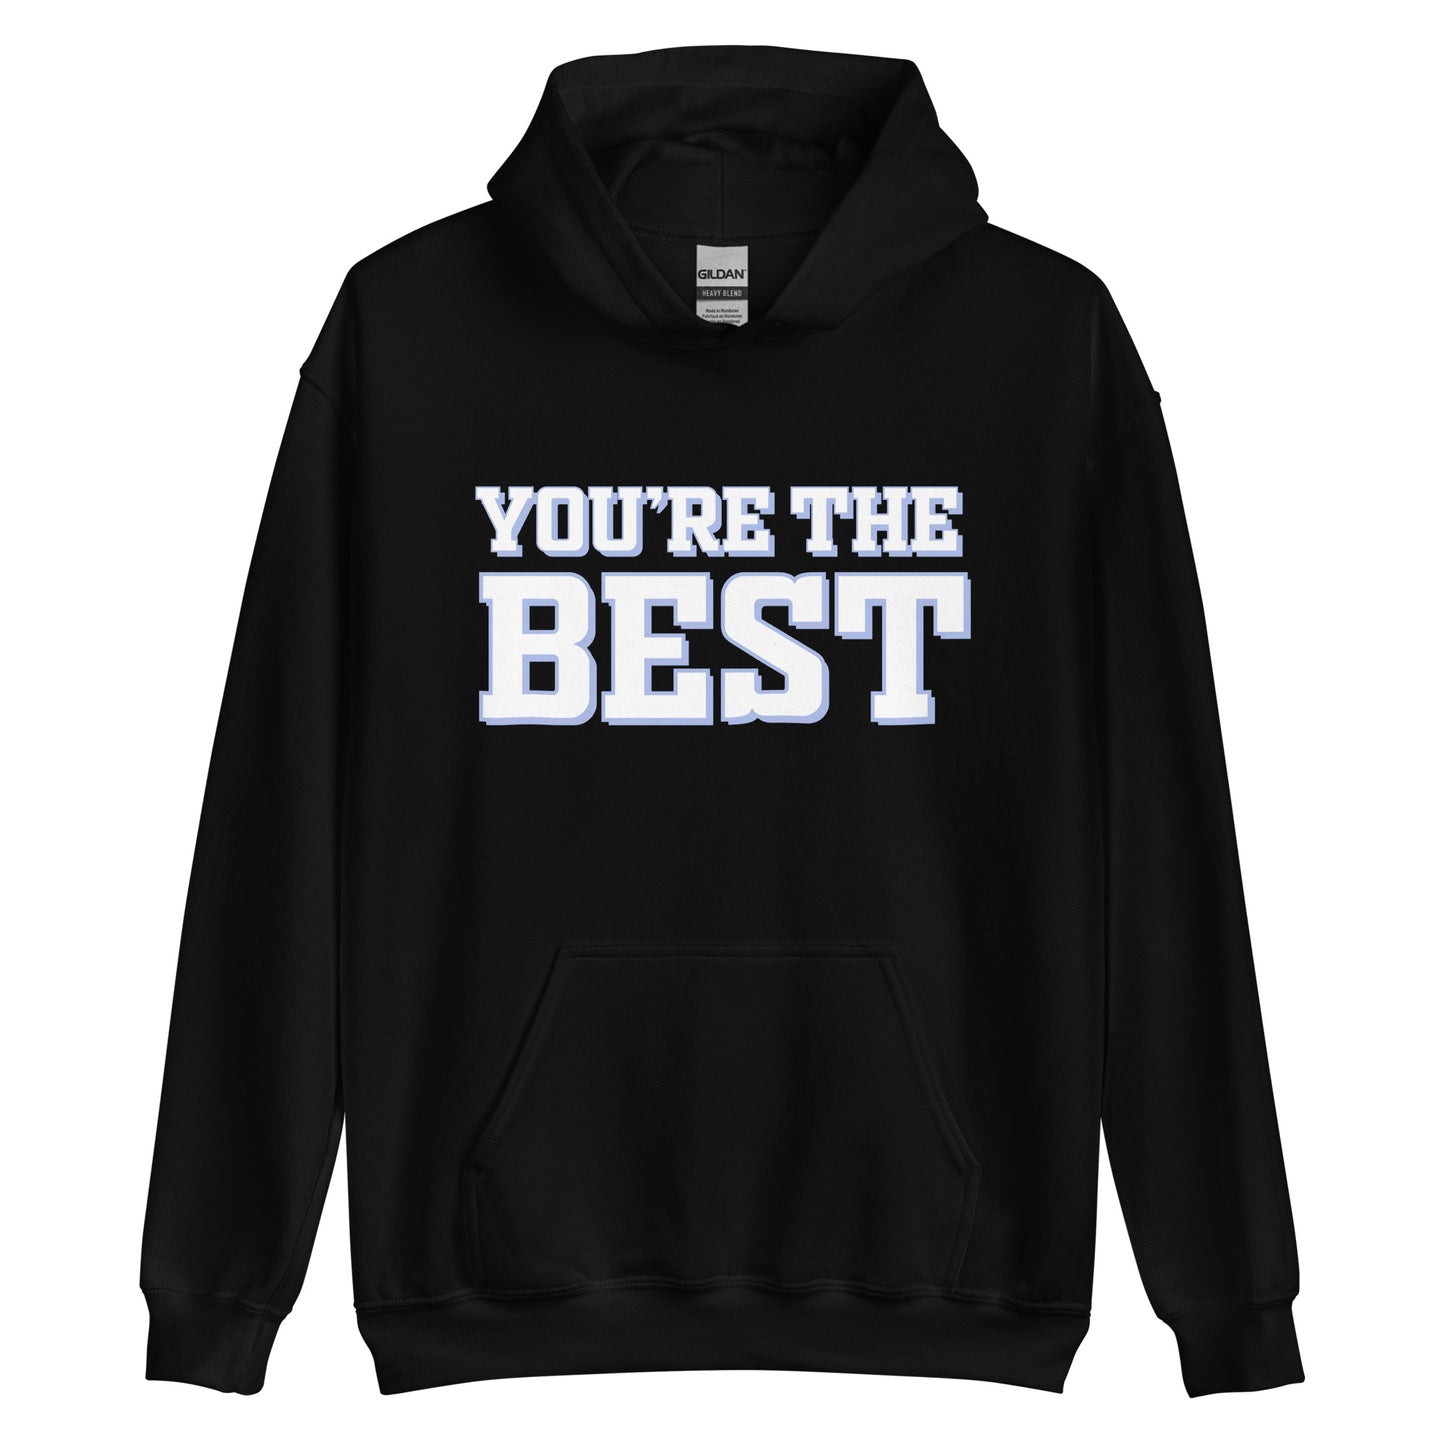 You're the best hoodie